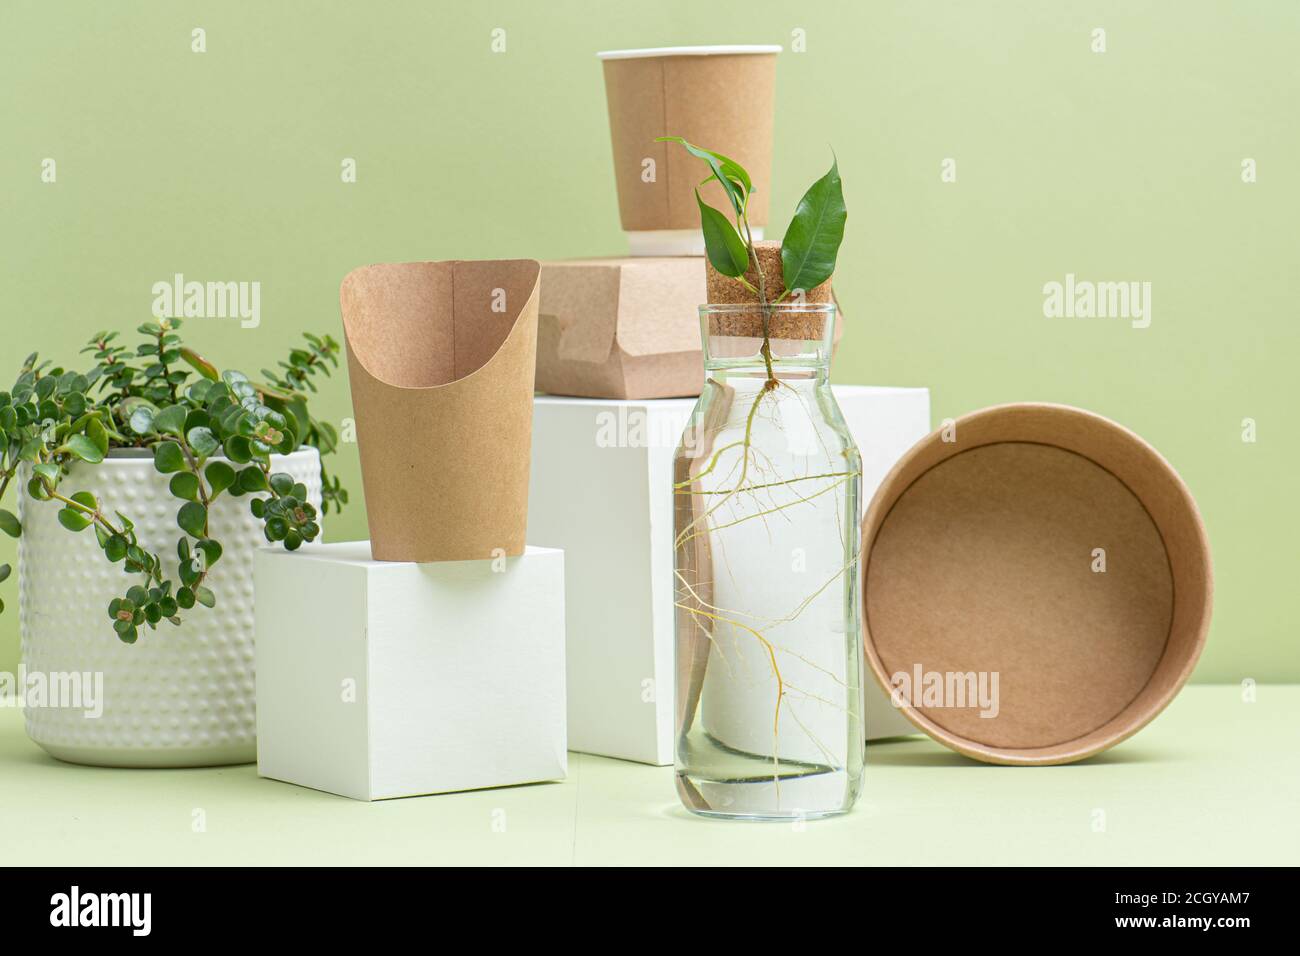 Eco-friendly disposable paper containers and live plants Stock Photo